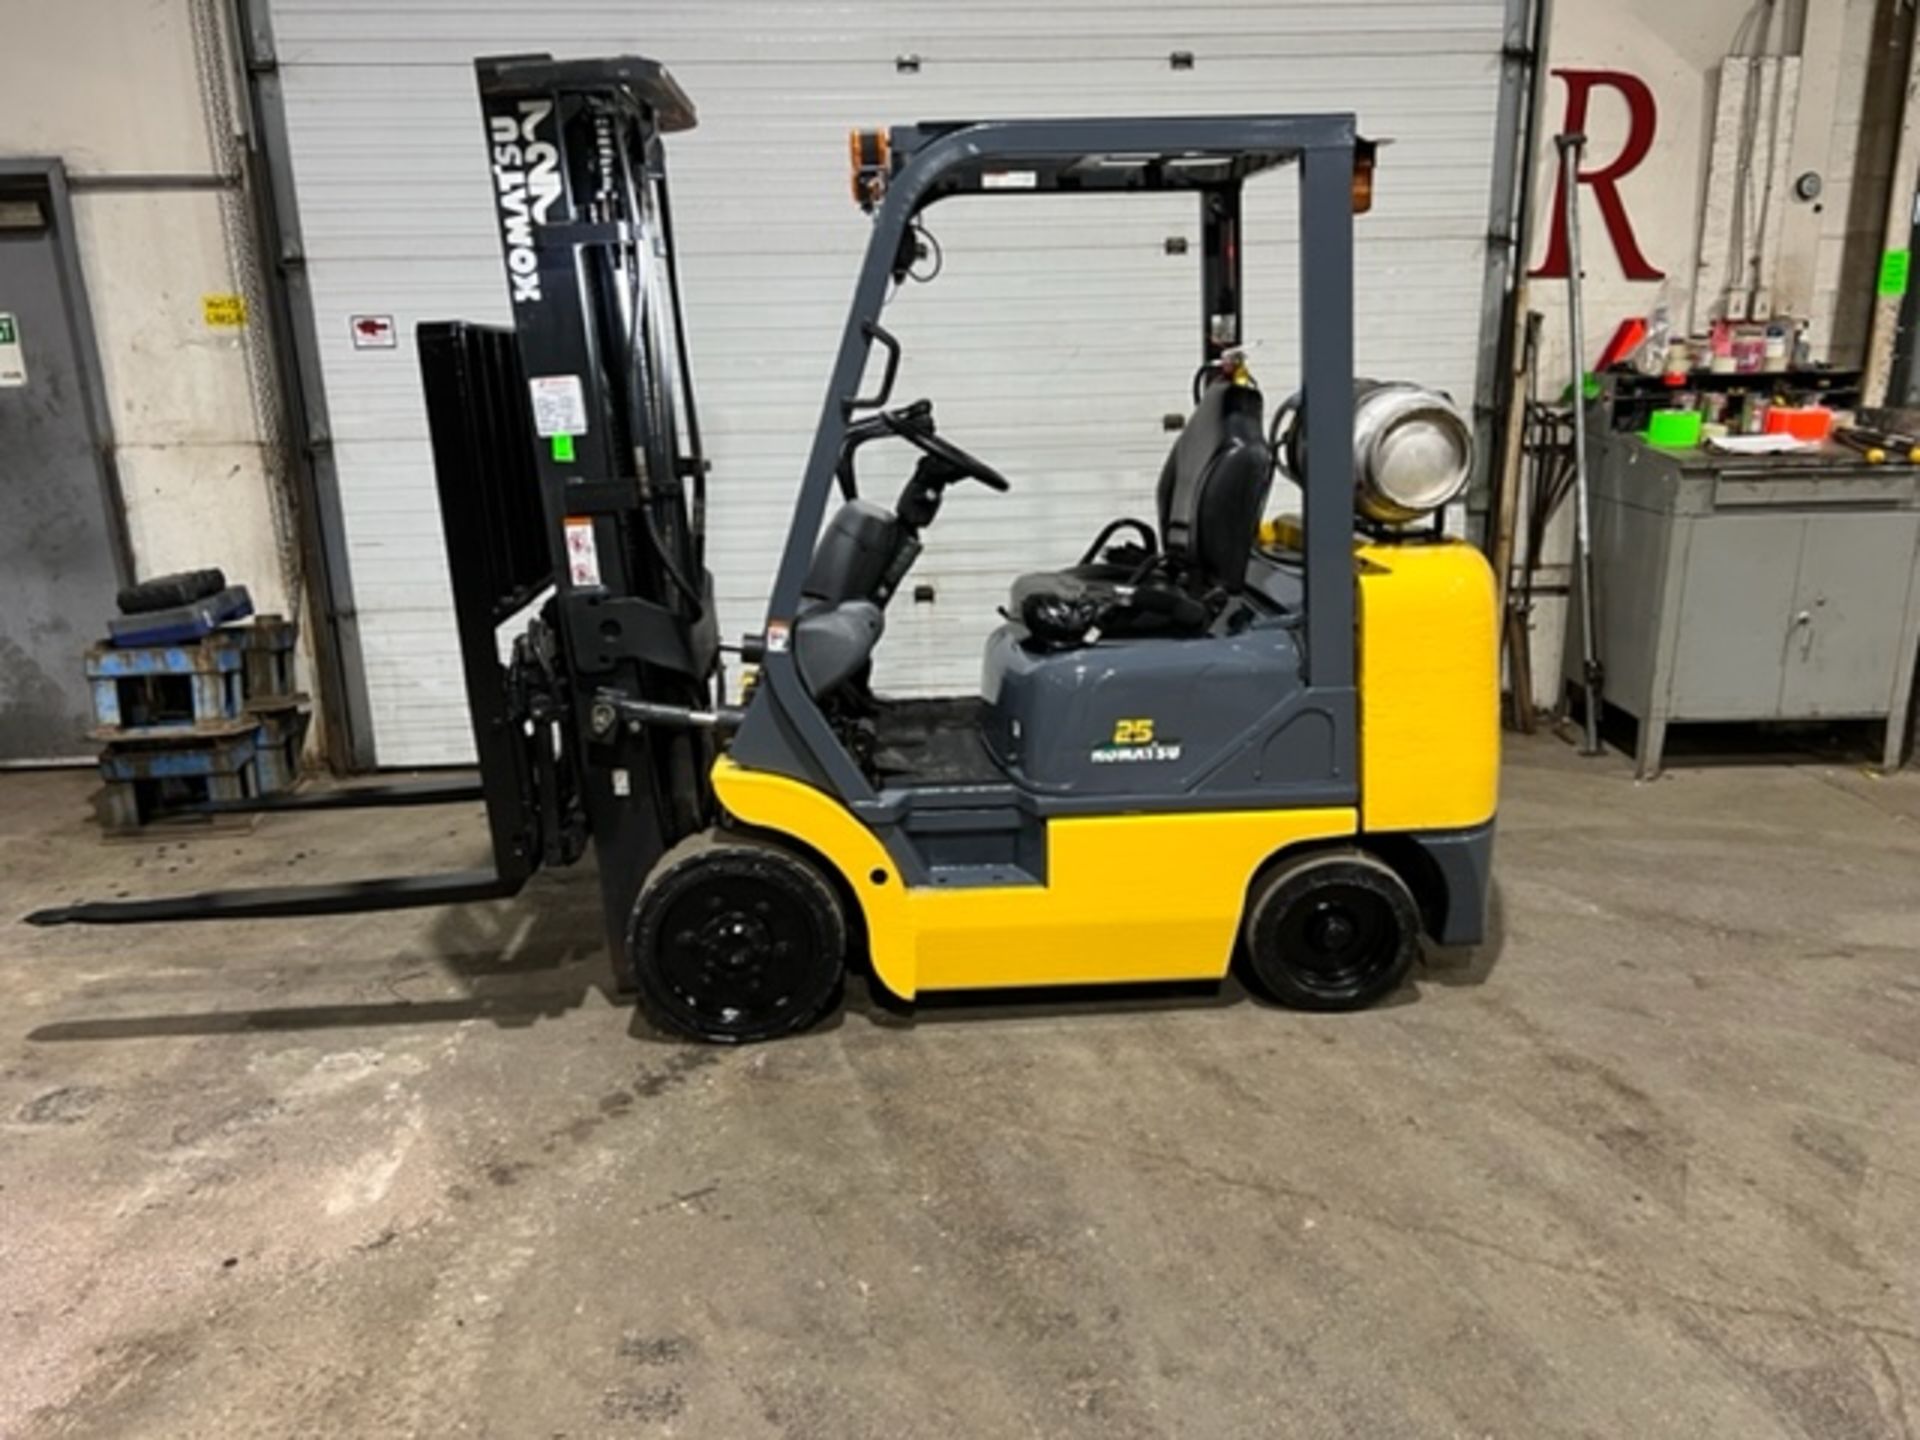 FREE CUSTOMS - Nice Komatsu 5,000lbs Capacity Forklift LPG (Propane) with 3-stage mast with Fork